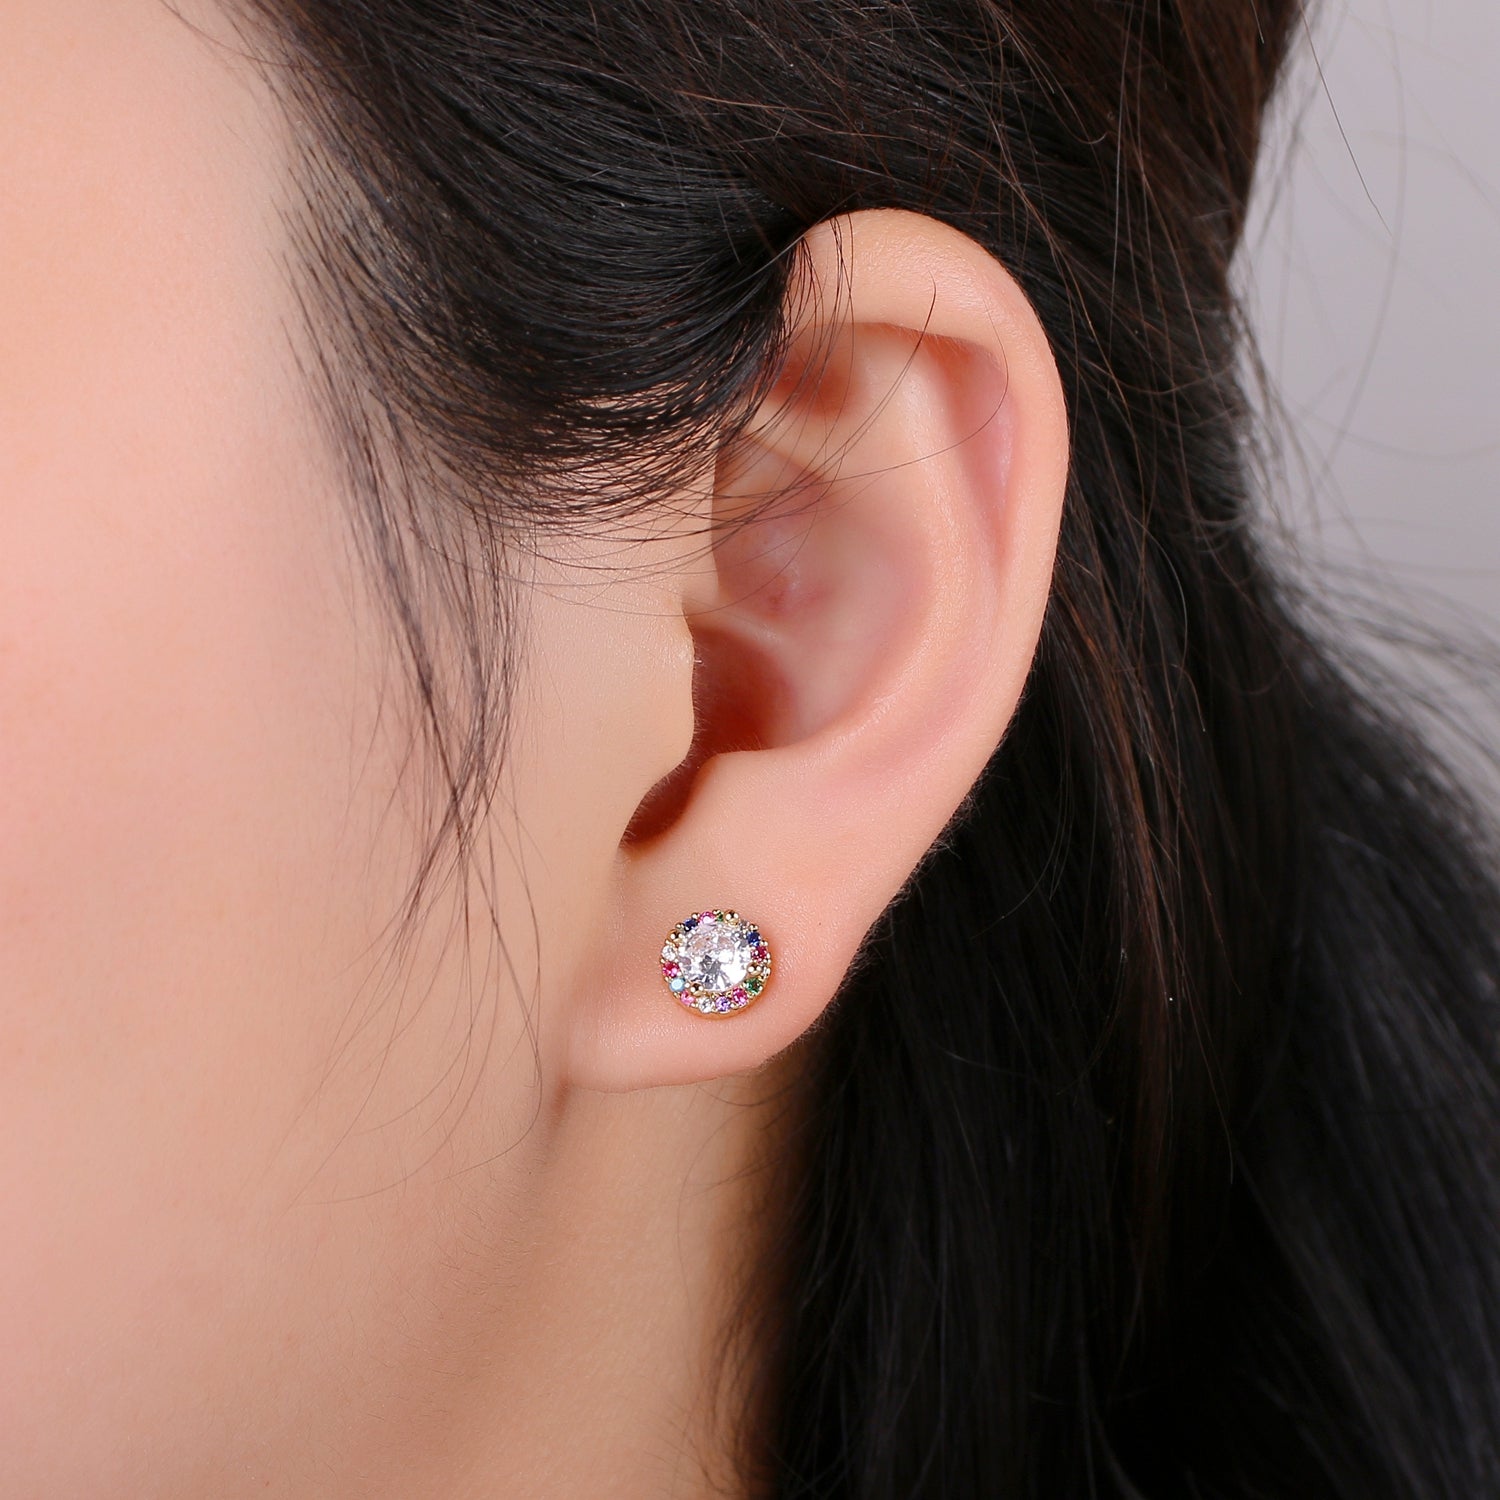 Gold Tiny Stud Earrings - Rainbow Micro Pave Studs - Dainty CZ Studs -5mm Round Crystal Small Stud Earrings - DLUXCA